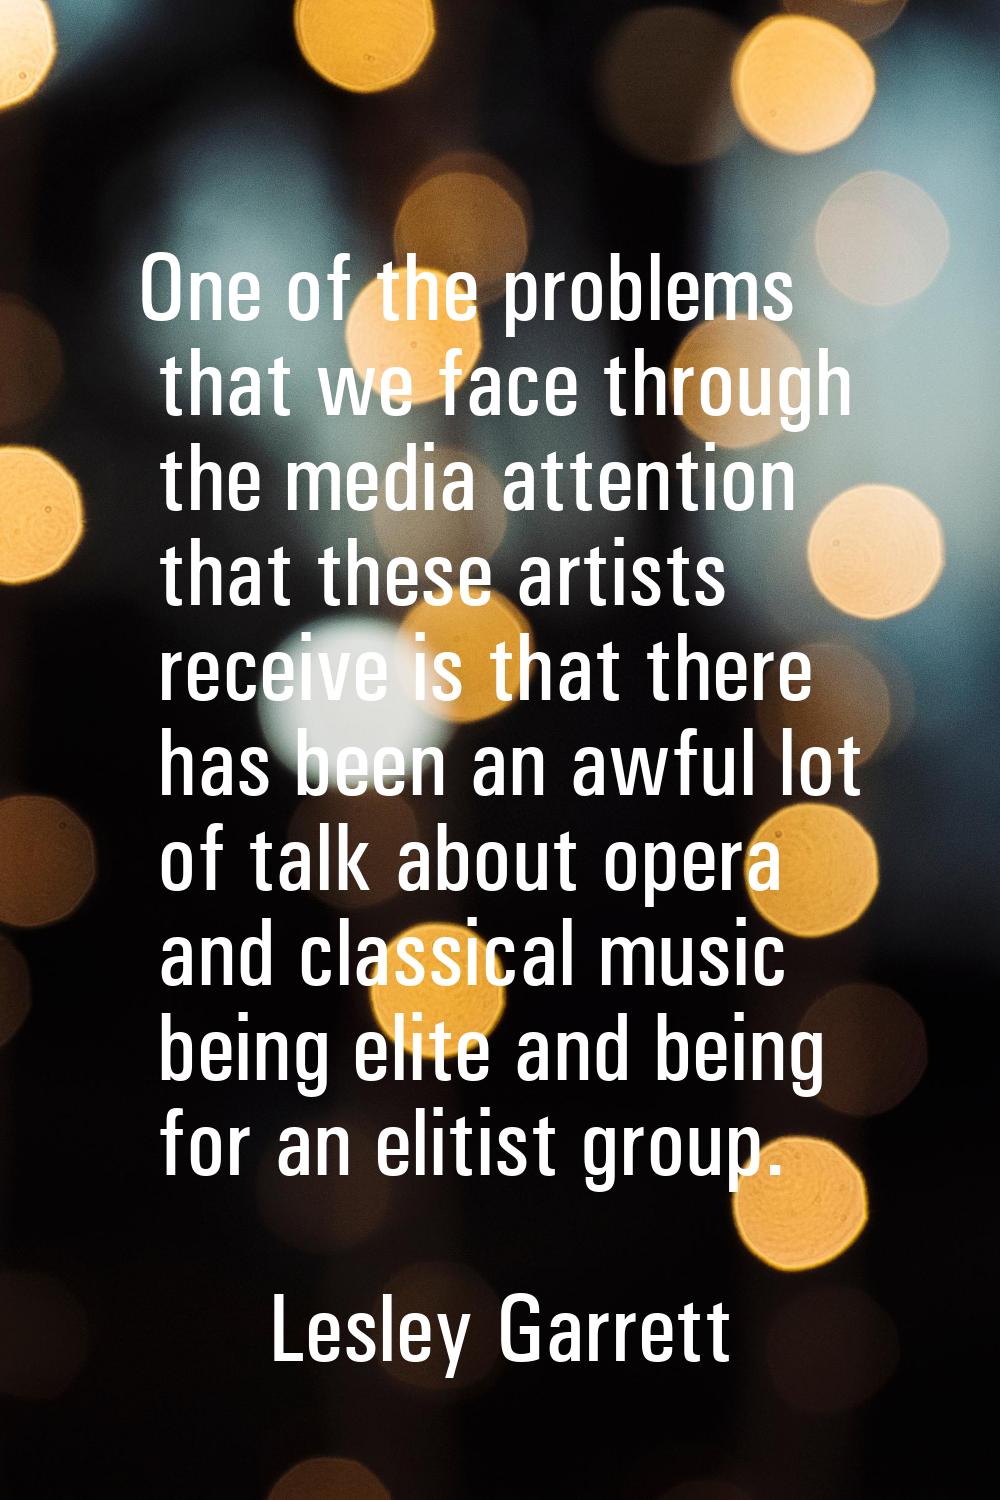 One of the problems that we face through the media attention that these artists receive is that the